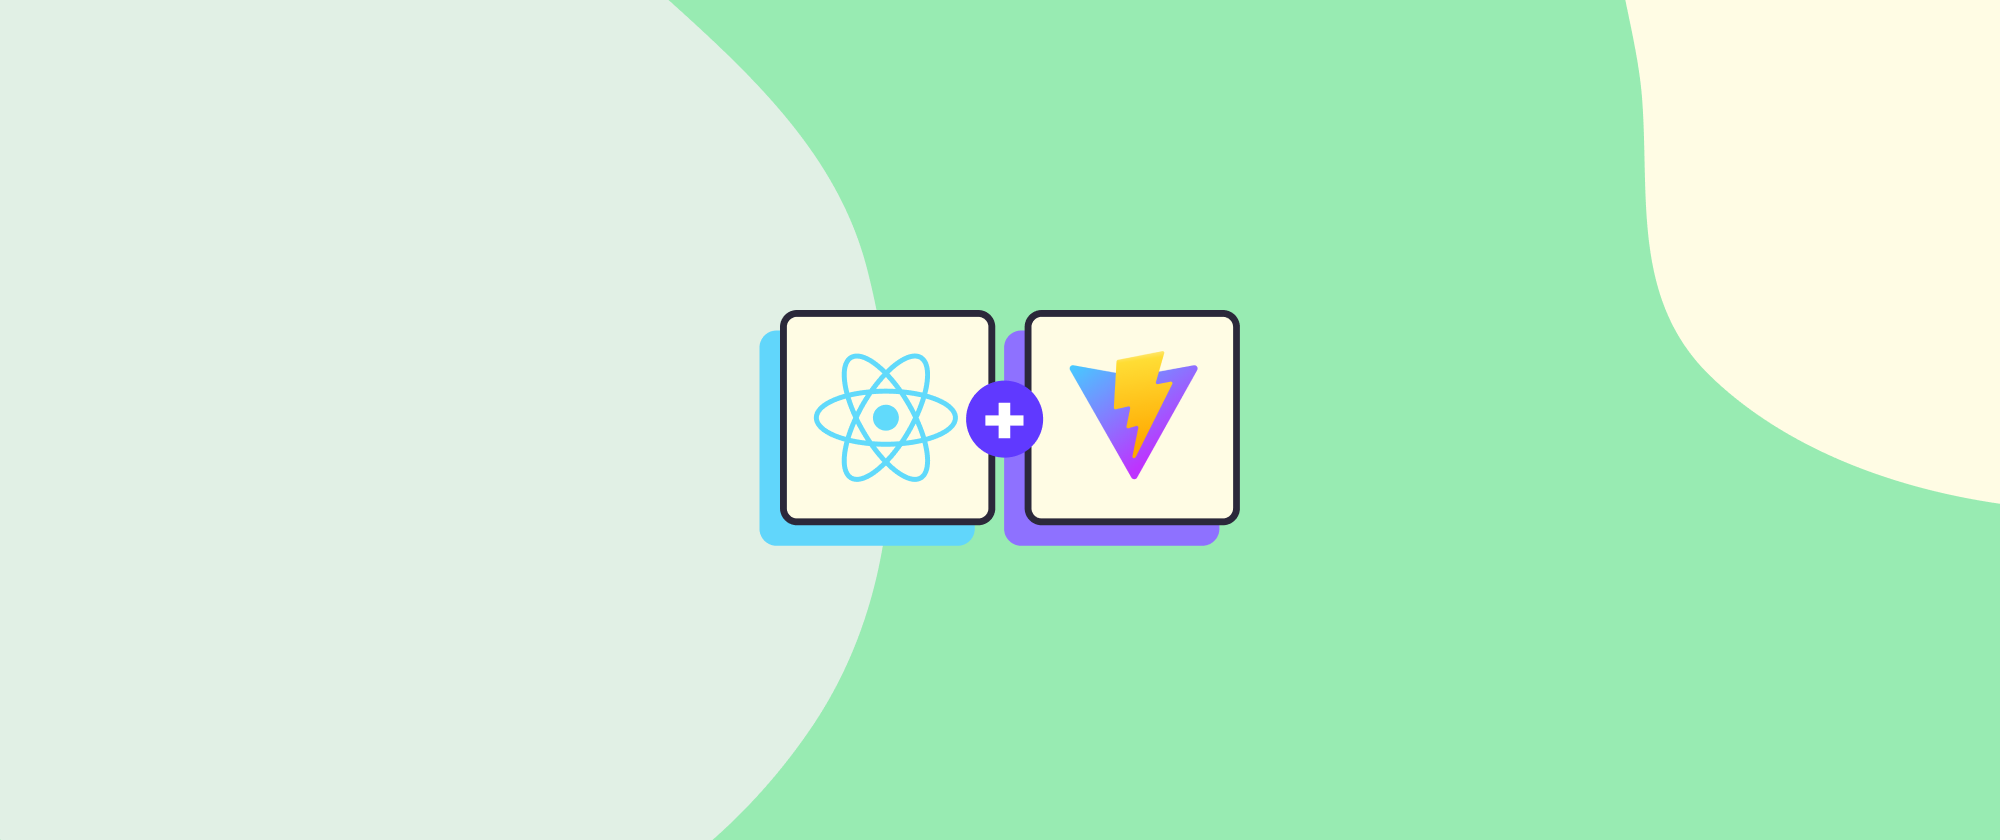 Create a new  React app with Vite